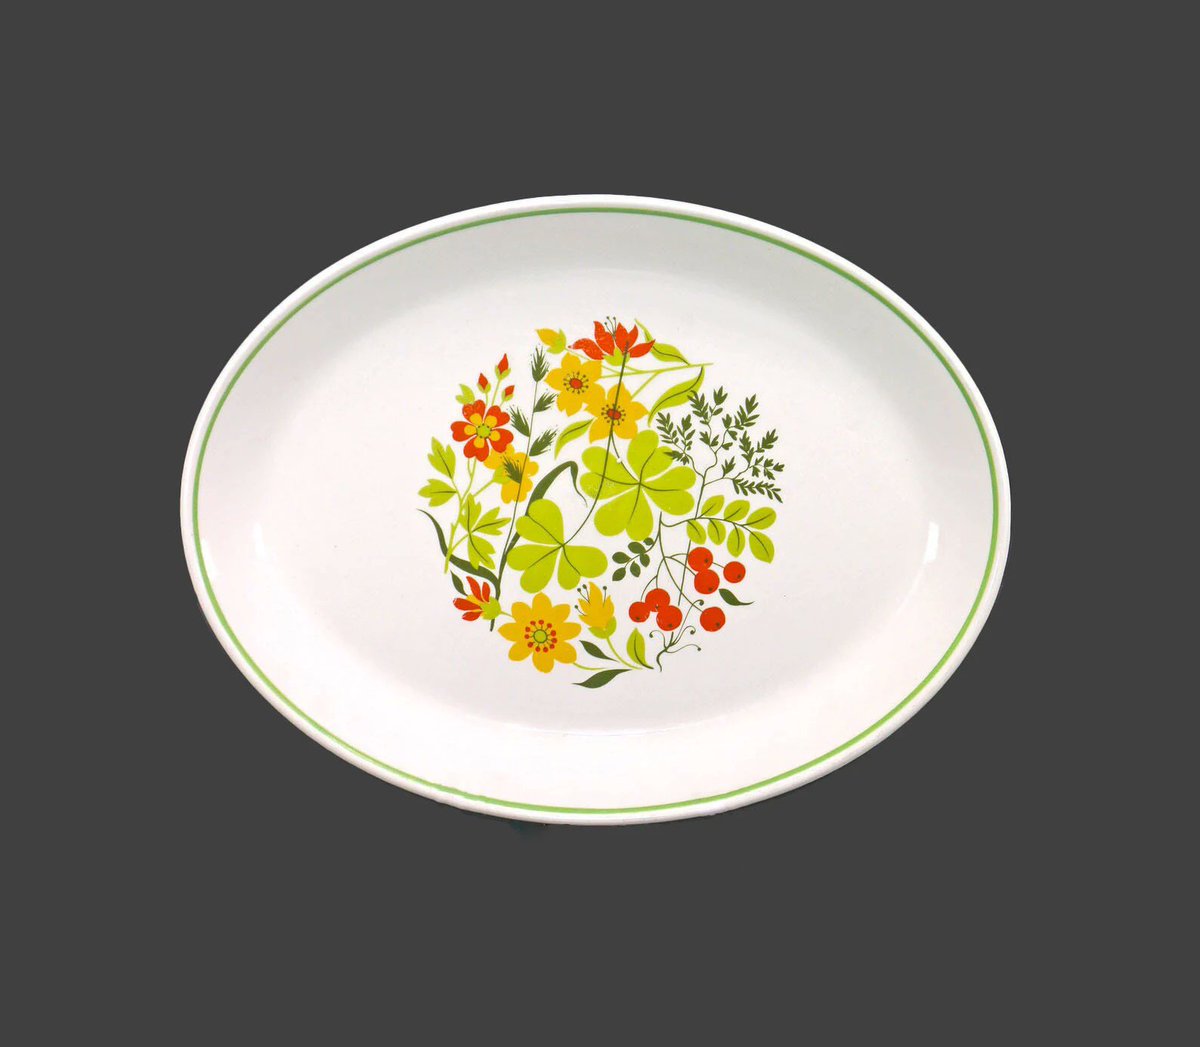 Johnson Brothers JB1017 oval platter. Retro florals. Made in England. etsy.me/3Wq1ZBt via @Etsy #BuyfromGroovy #antiqueshop #tableware #dinnerware #tabledecor #JohnsonBrothers #JB1017 #JohnsonBrothersJB1017 #flowerpower #1970skitchen #retrotableware #EtsySellers